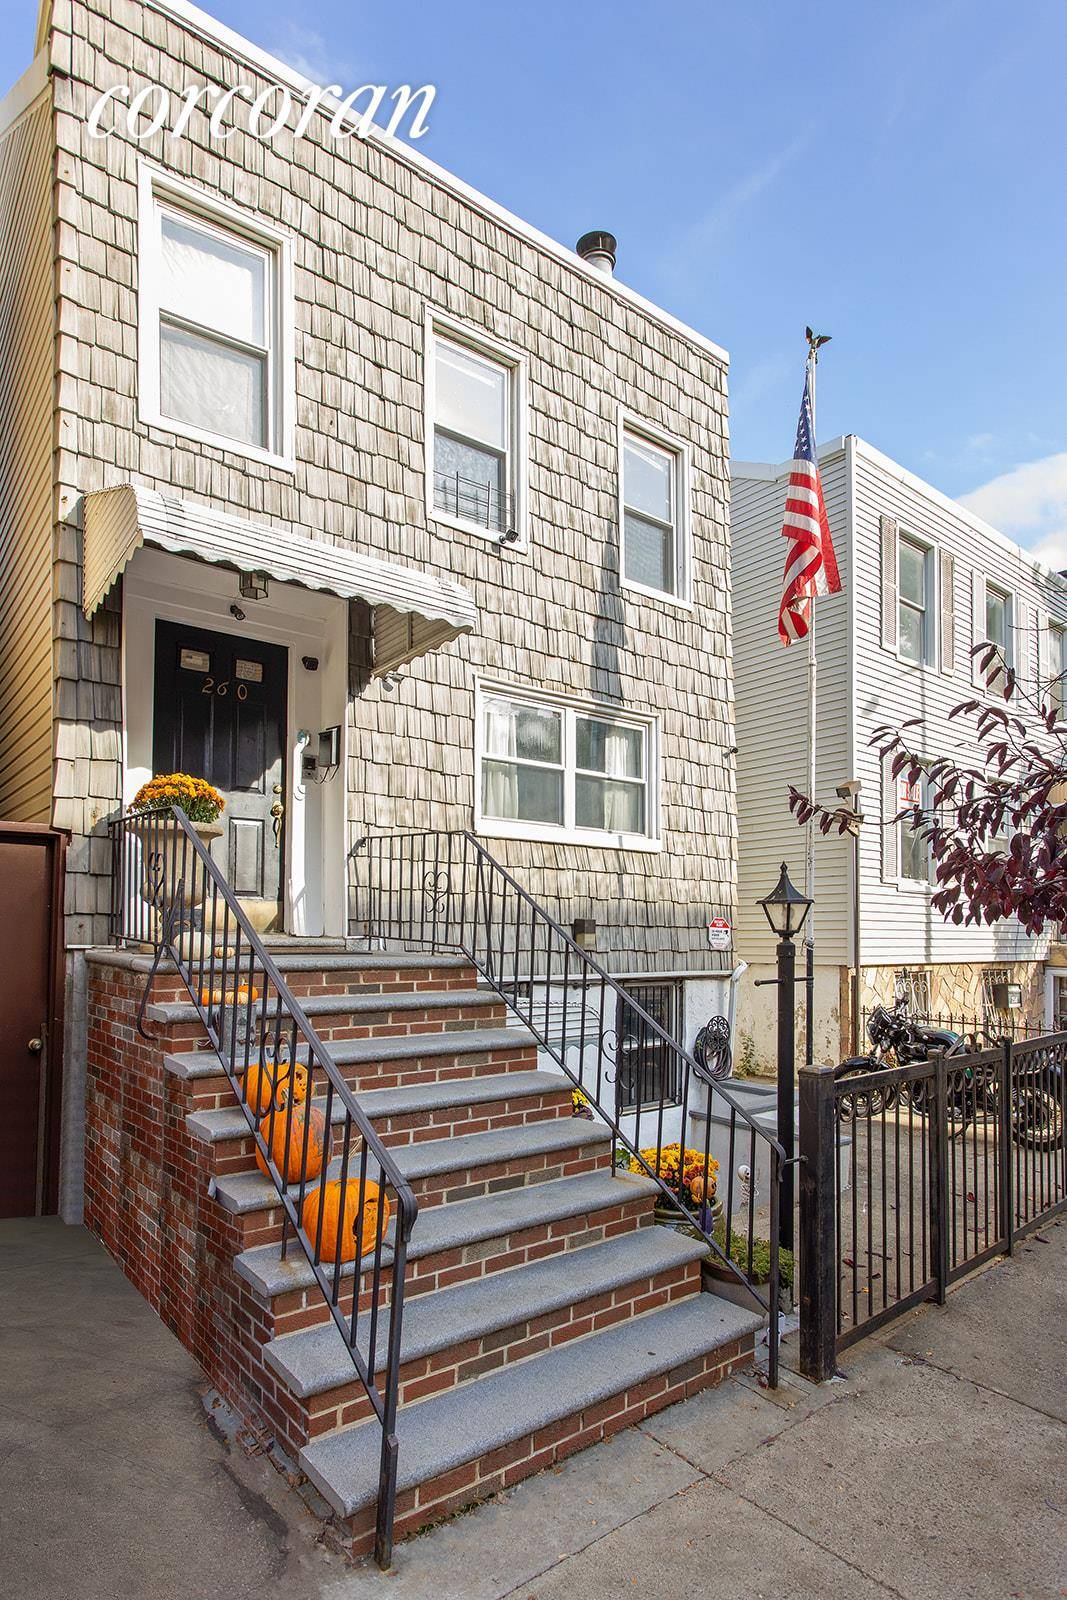 Look no further. The most charming, Greenpoint townhouse has hit the market.